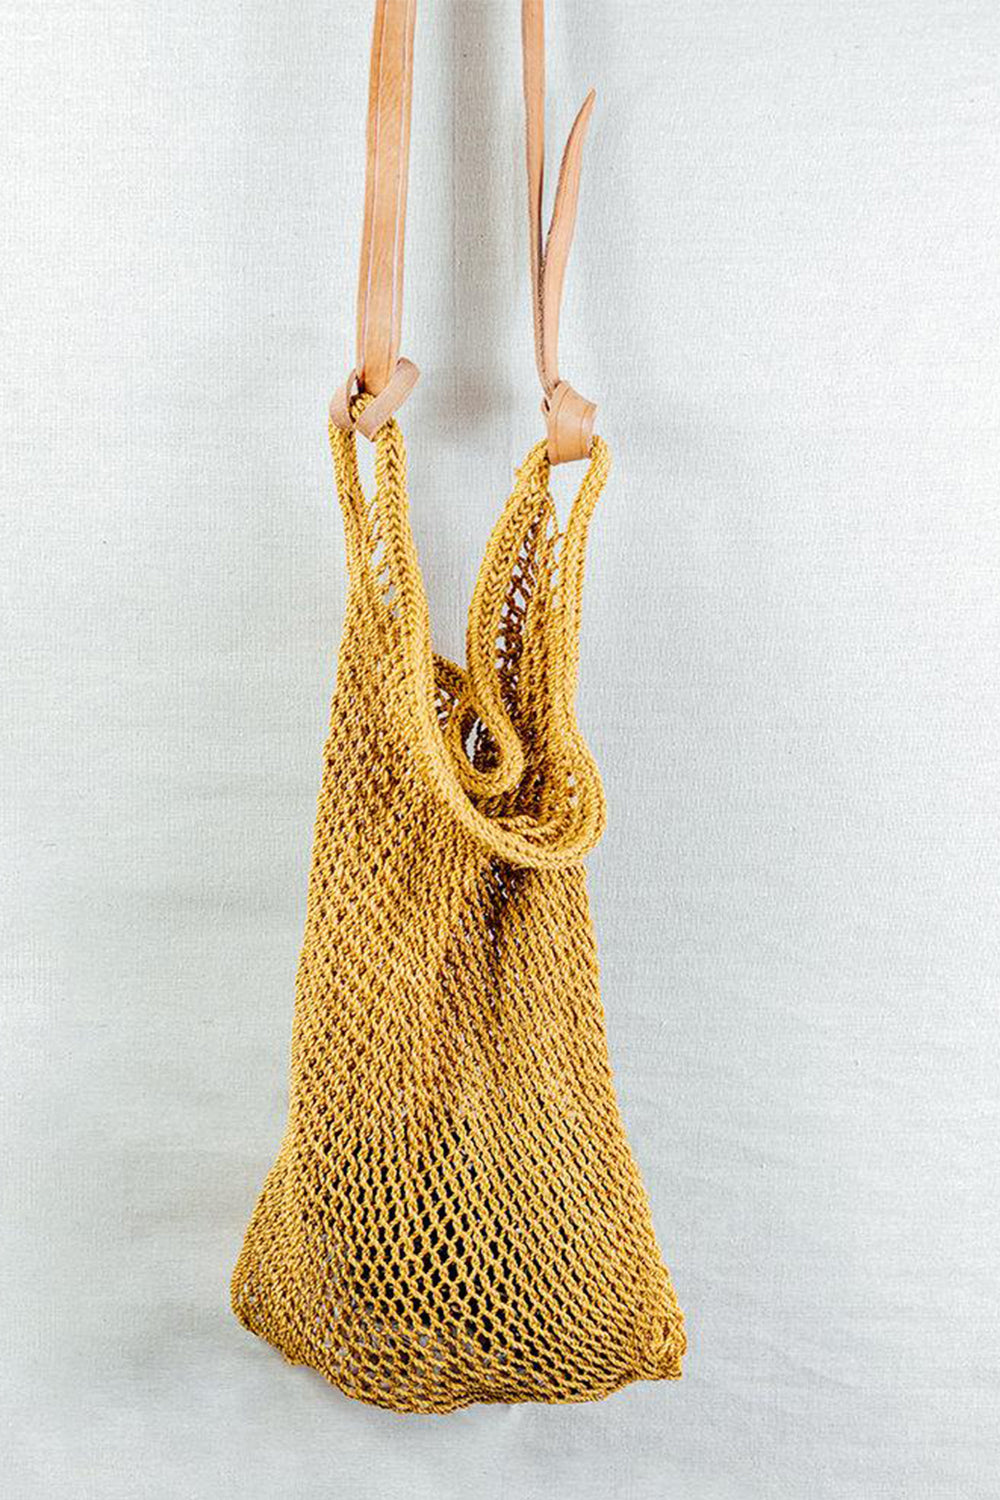 Artisan & Fox - Clutches & Bags - MAGUEY Handwoven Bag in Mexican Marigold - Handcrafted in Mexico